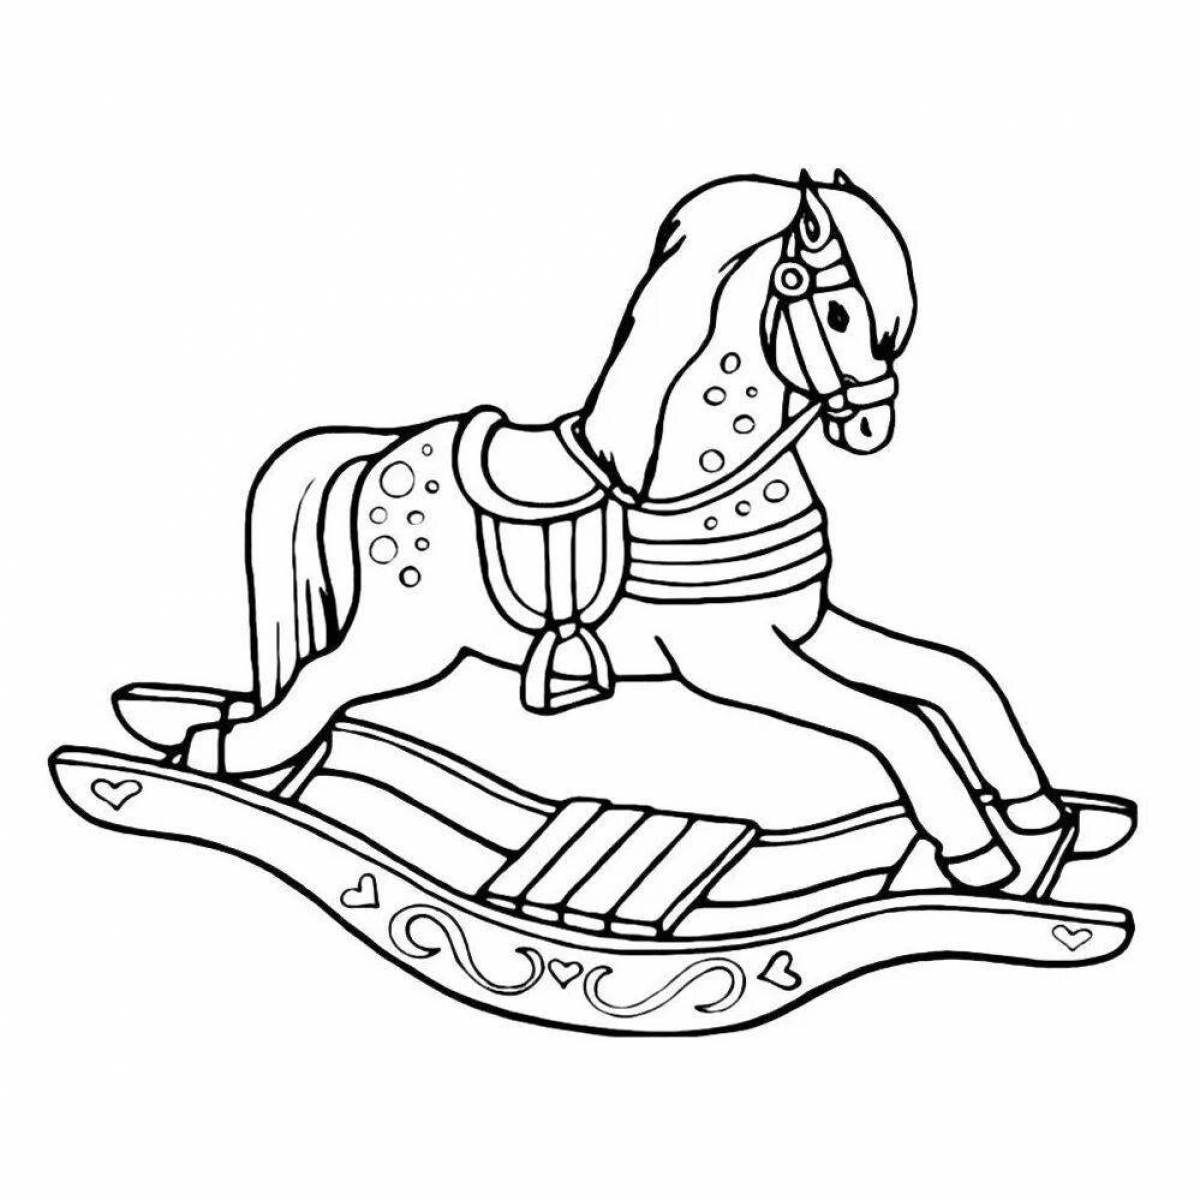 Coloring book shining rocking horse for preschoolers